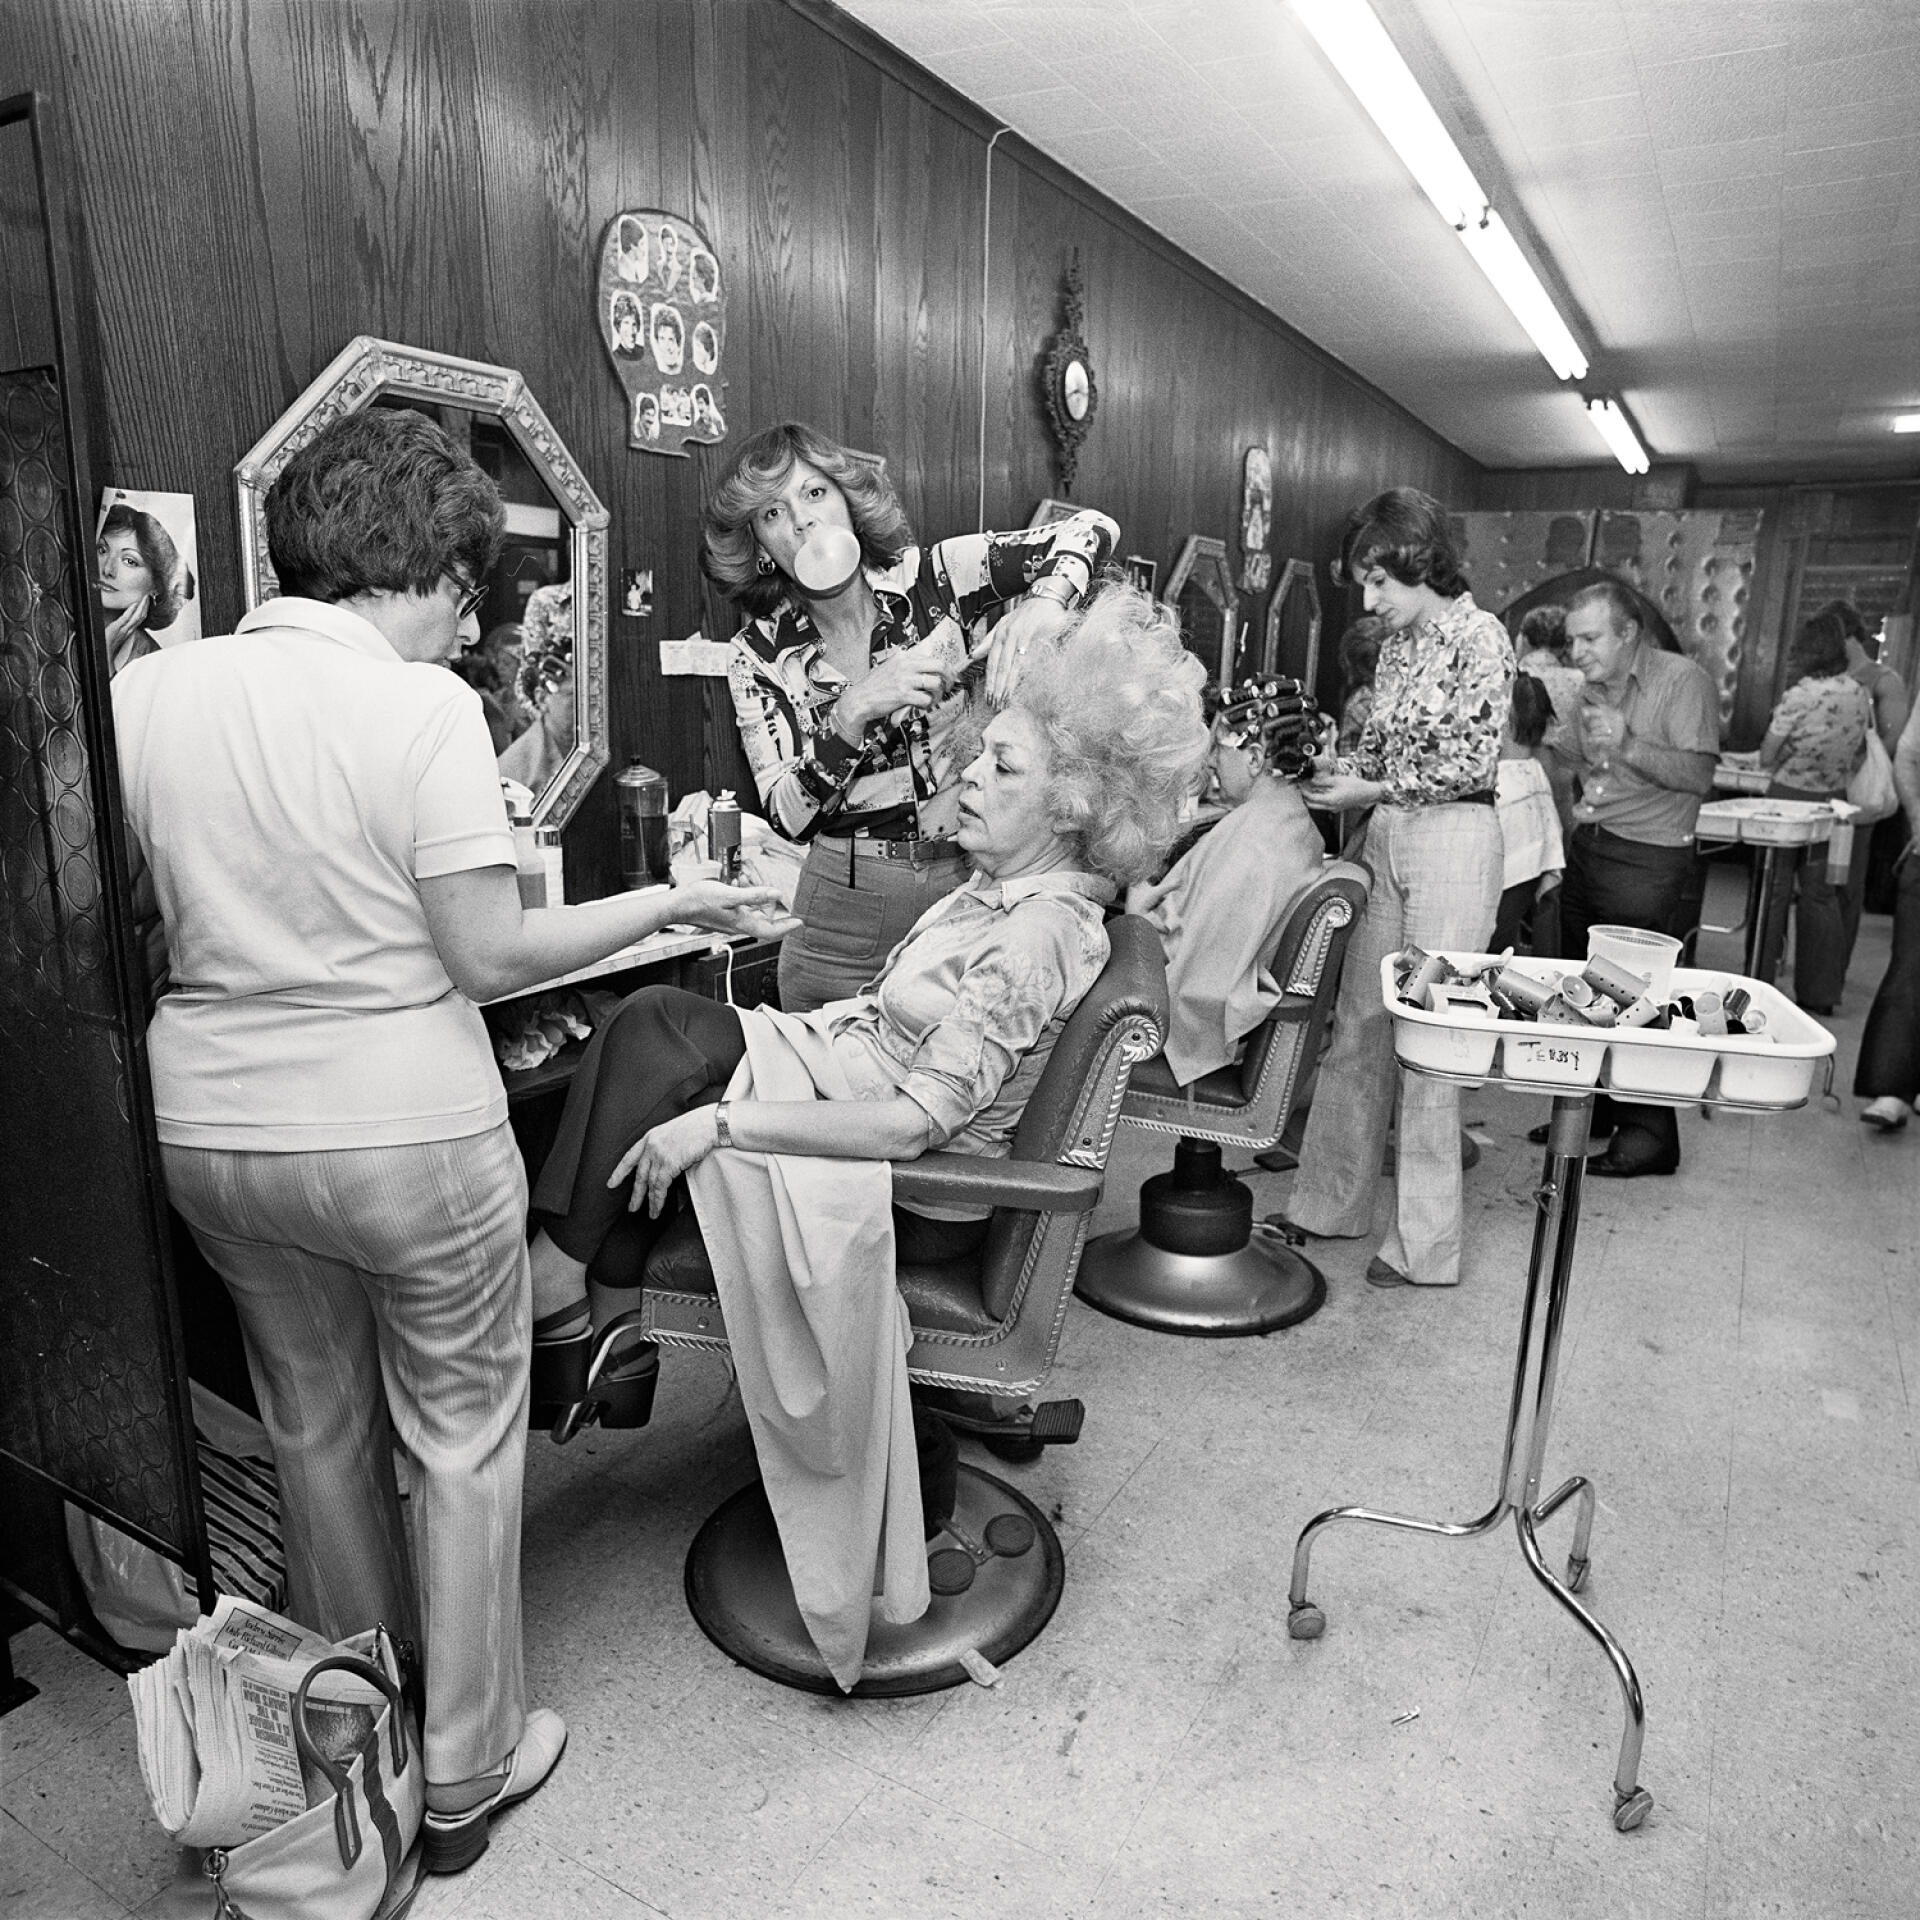 The photographer's mother getting her hair done at Besame Beauty (Massapequa, New York, 1979).